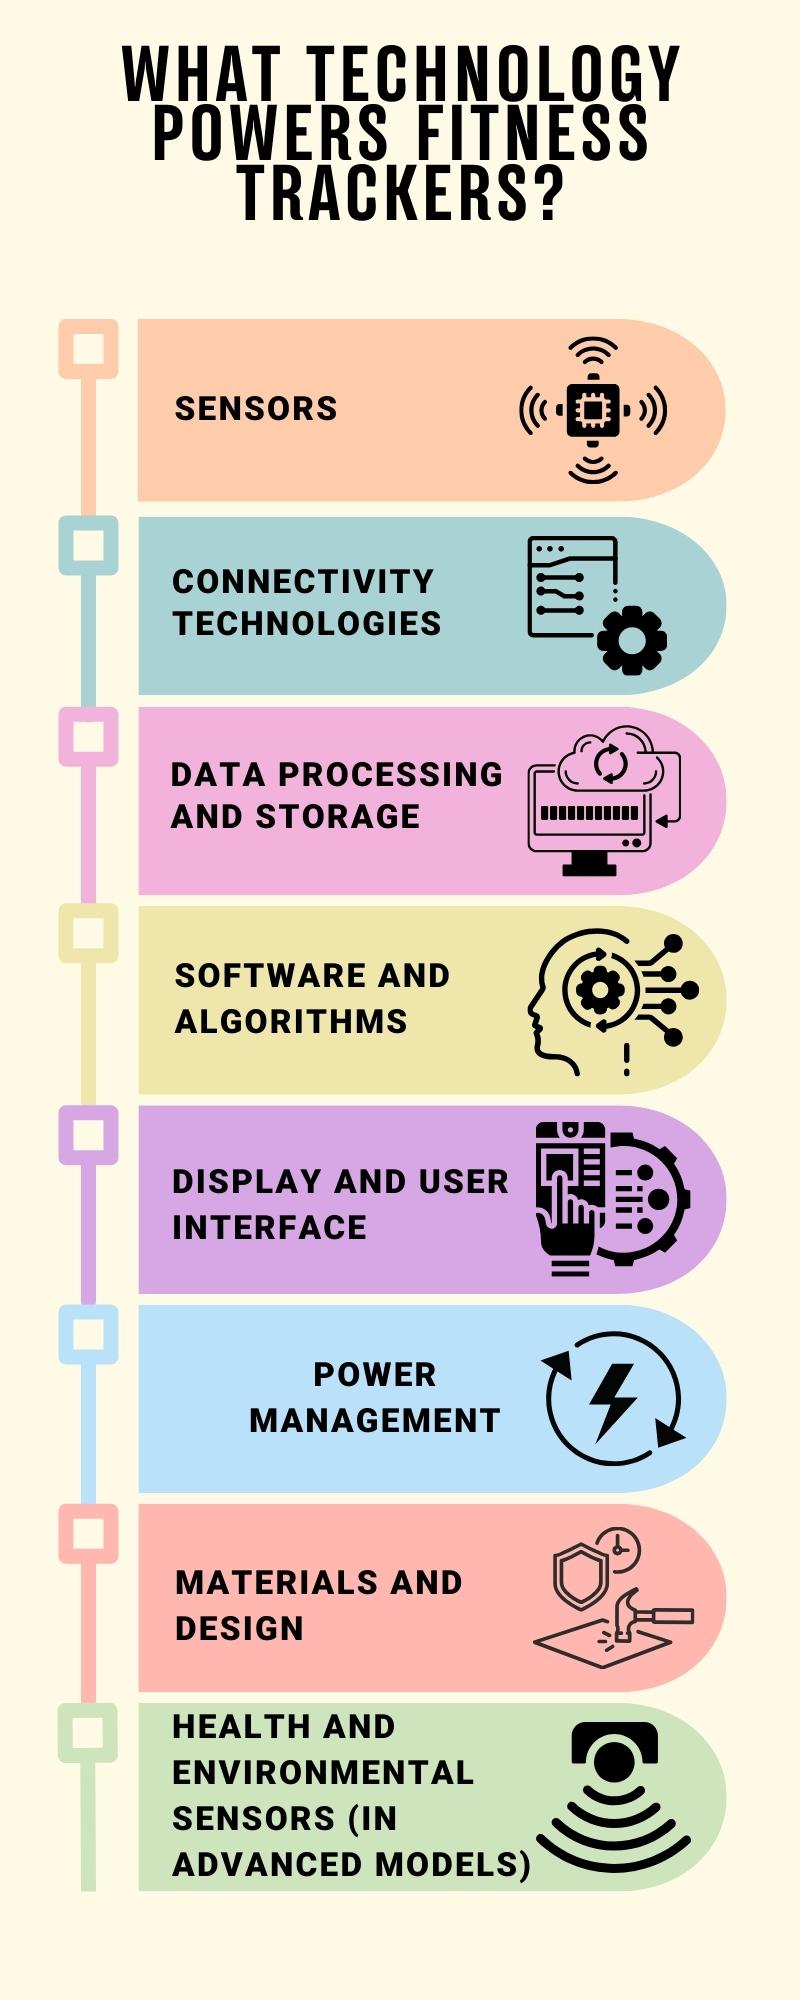 The infographic shows different technologies that power fitness trackers. The technology that powers fitness trackers includes sensors, connectivity technologies, data processing and storage, software and algorithms, display and user interface, power management, materials and design, and health and environmental sensors in advanced fitness trackers.